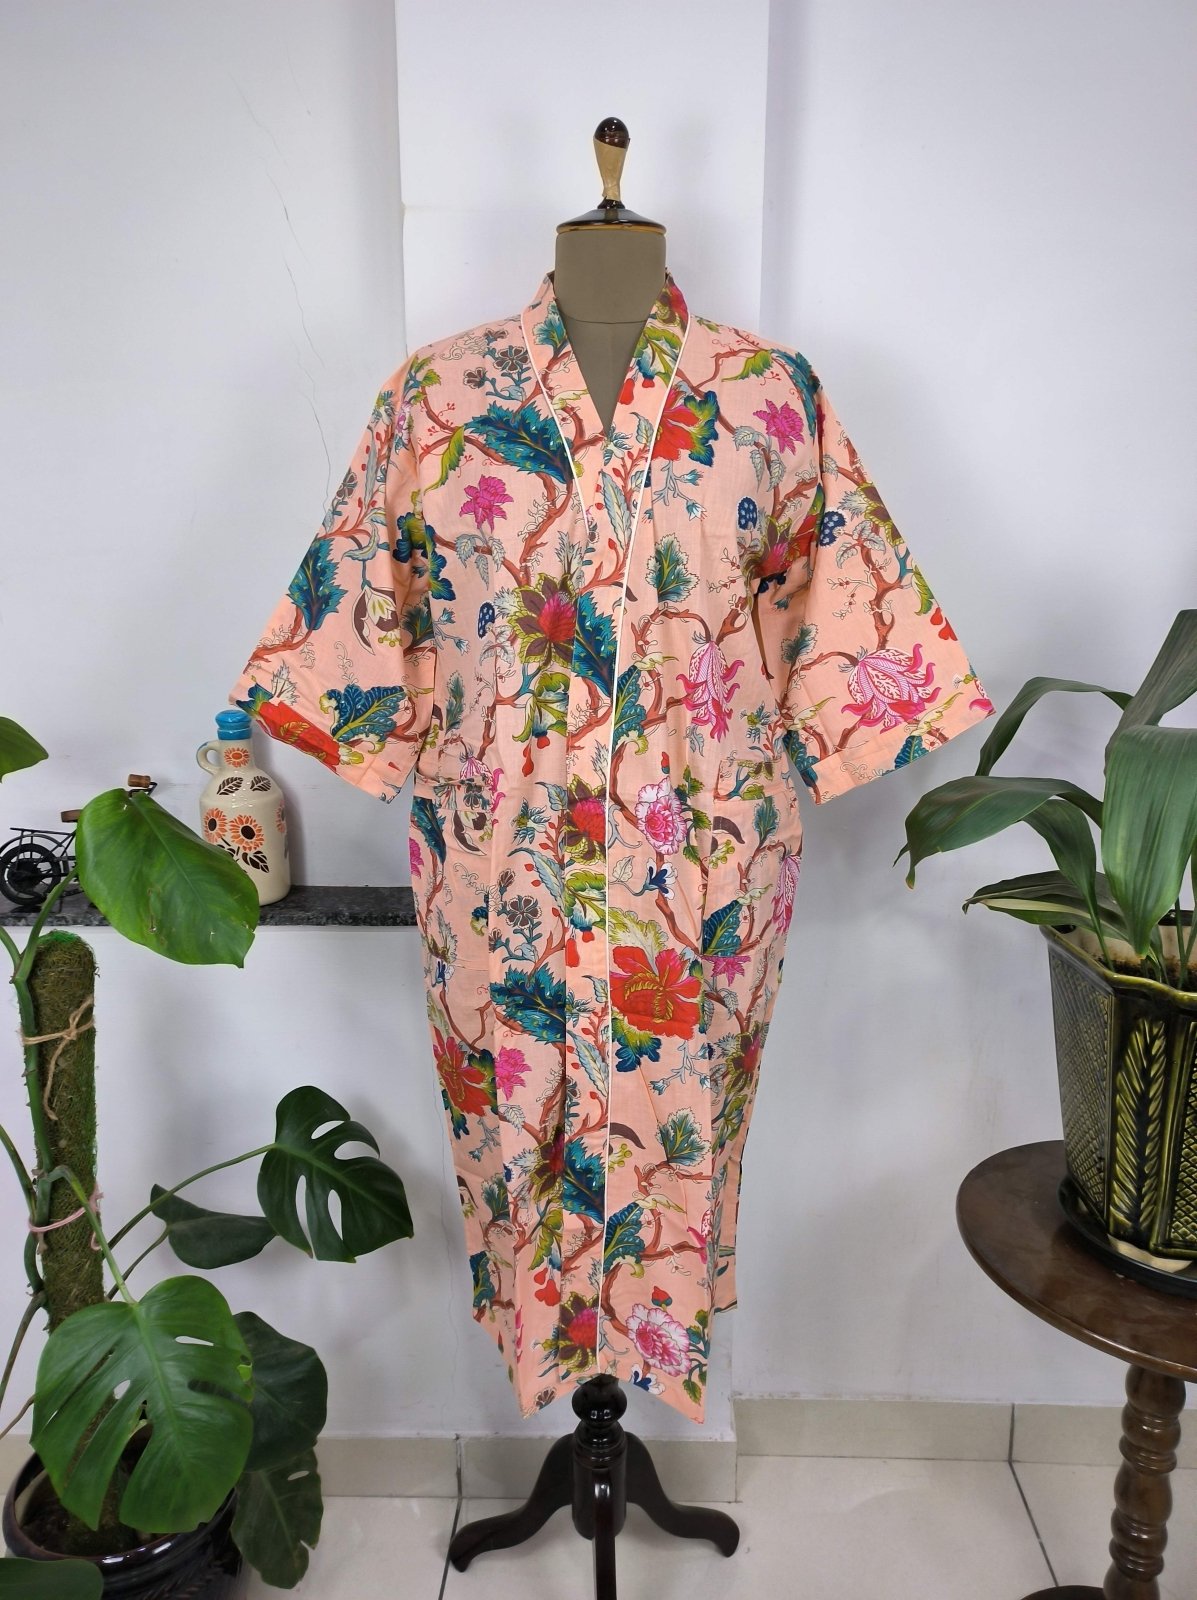 Boho House Robe Indian Handprinted Cotton Kimono Botanical Patter | Perfect for Summer Luxury Beach Holidays Yacht Cover Up Stunning Dress - The Eastern Loom